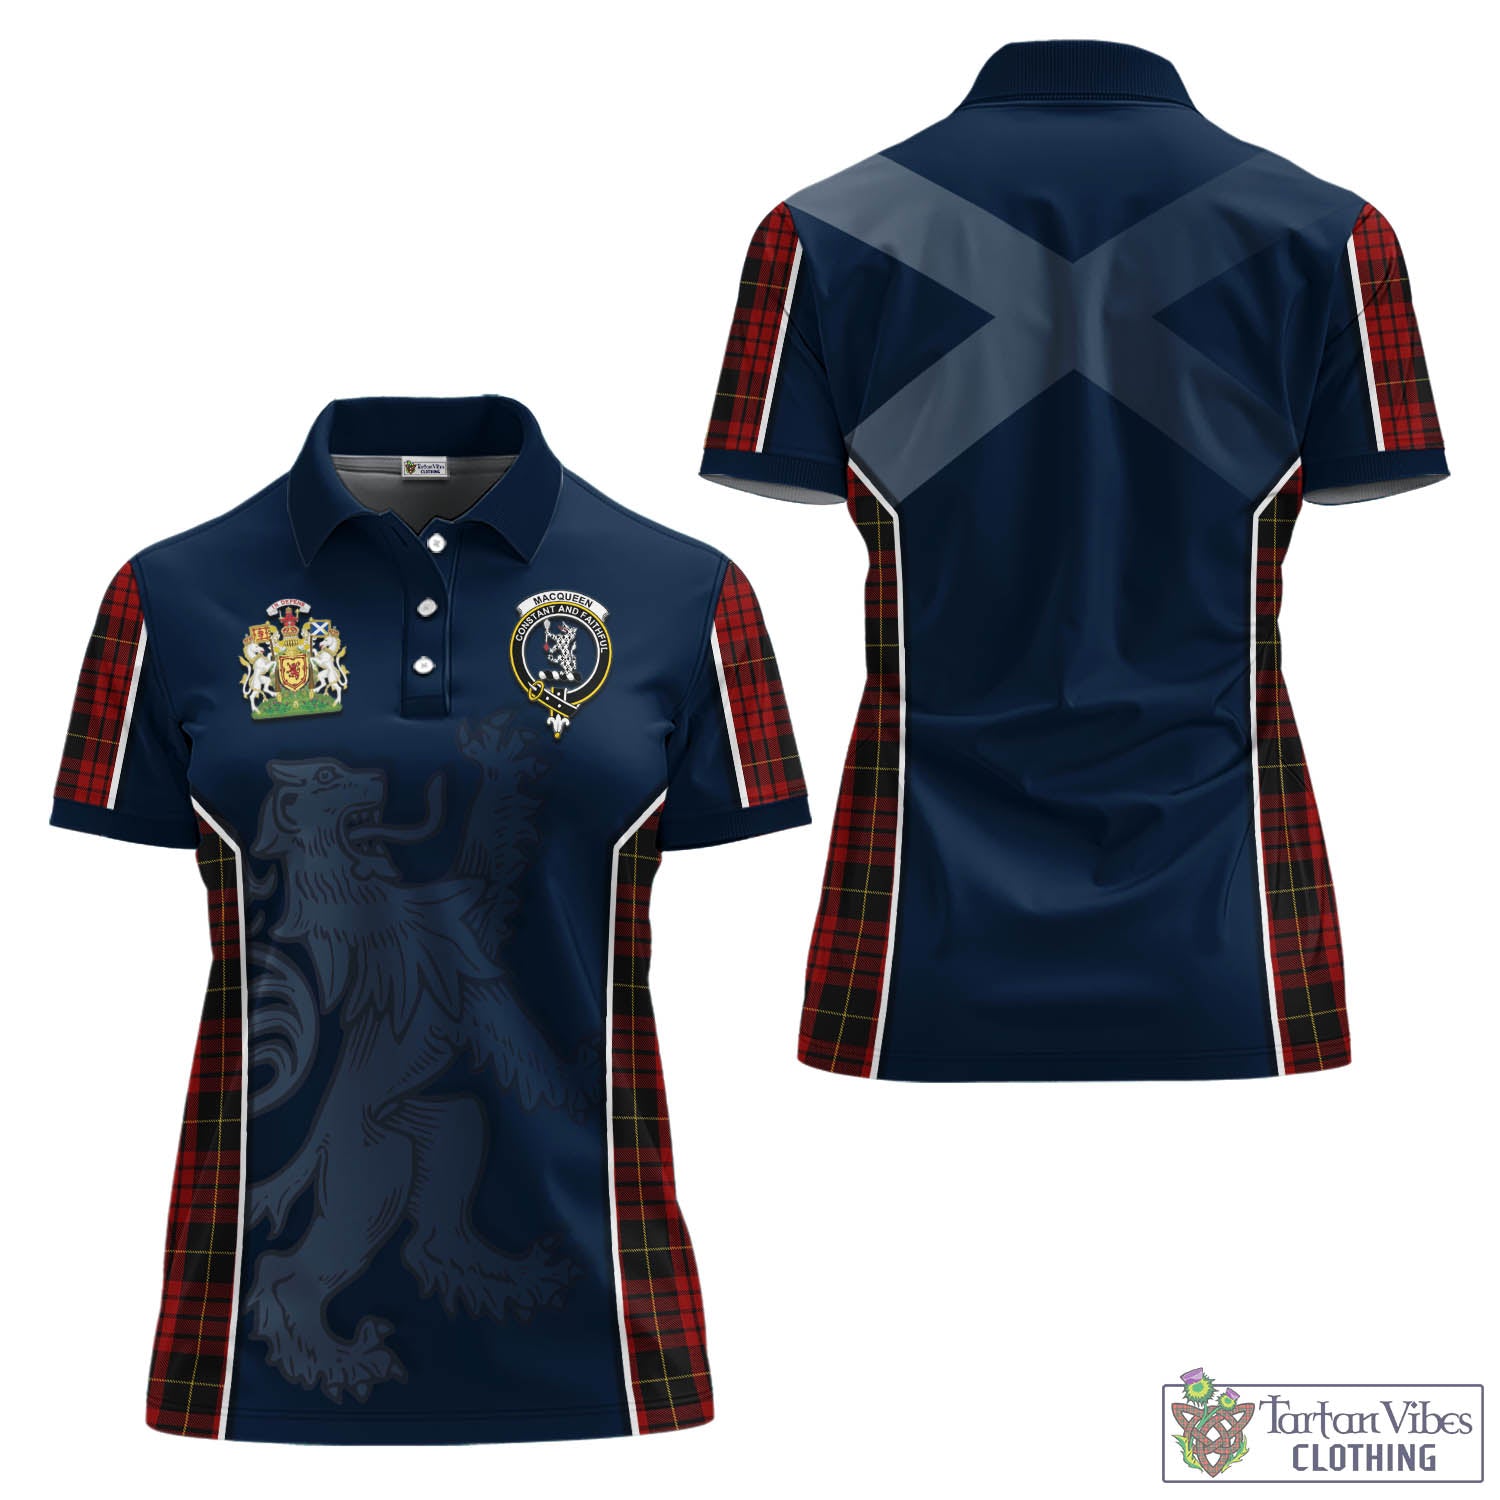 Tartan Vibes Clothing MacQueen Tartan Women's Polo Shirt with Family Crest and Lion Rampant Vibes Sport Style